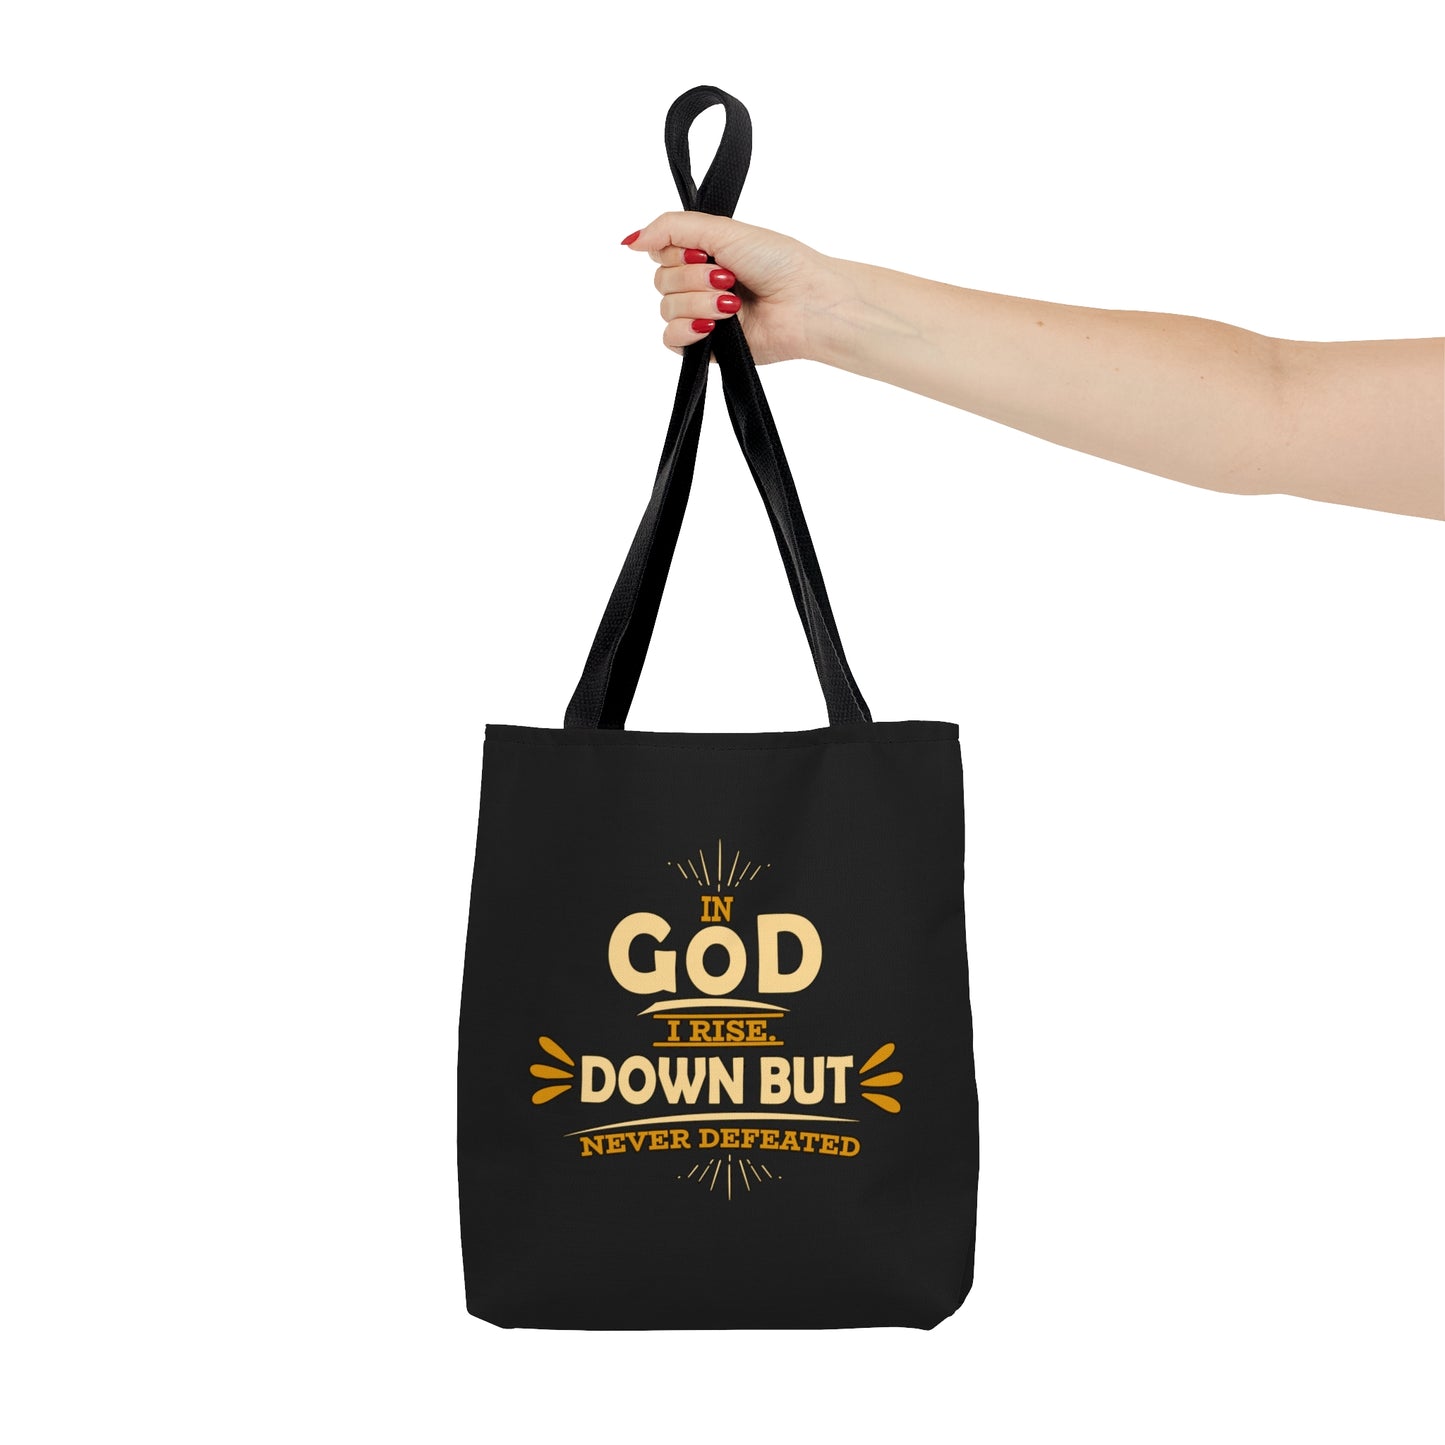 In God I Rise Down But Defeated Tote Bag